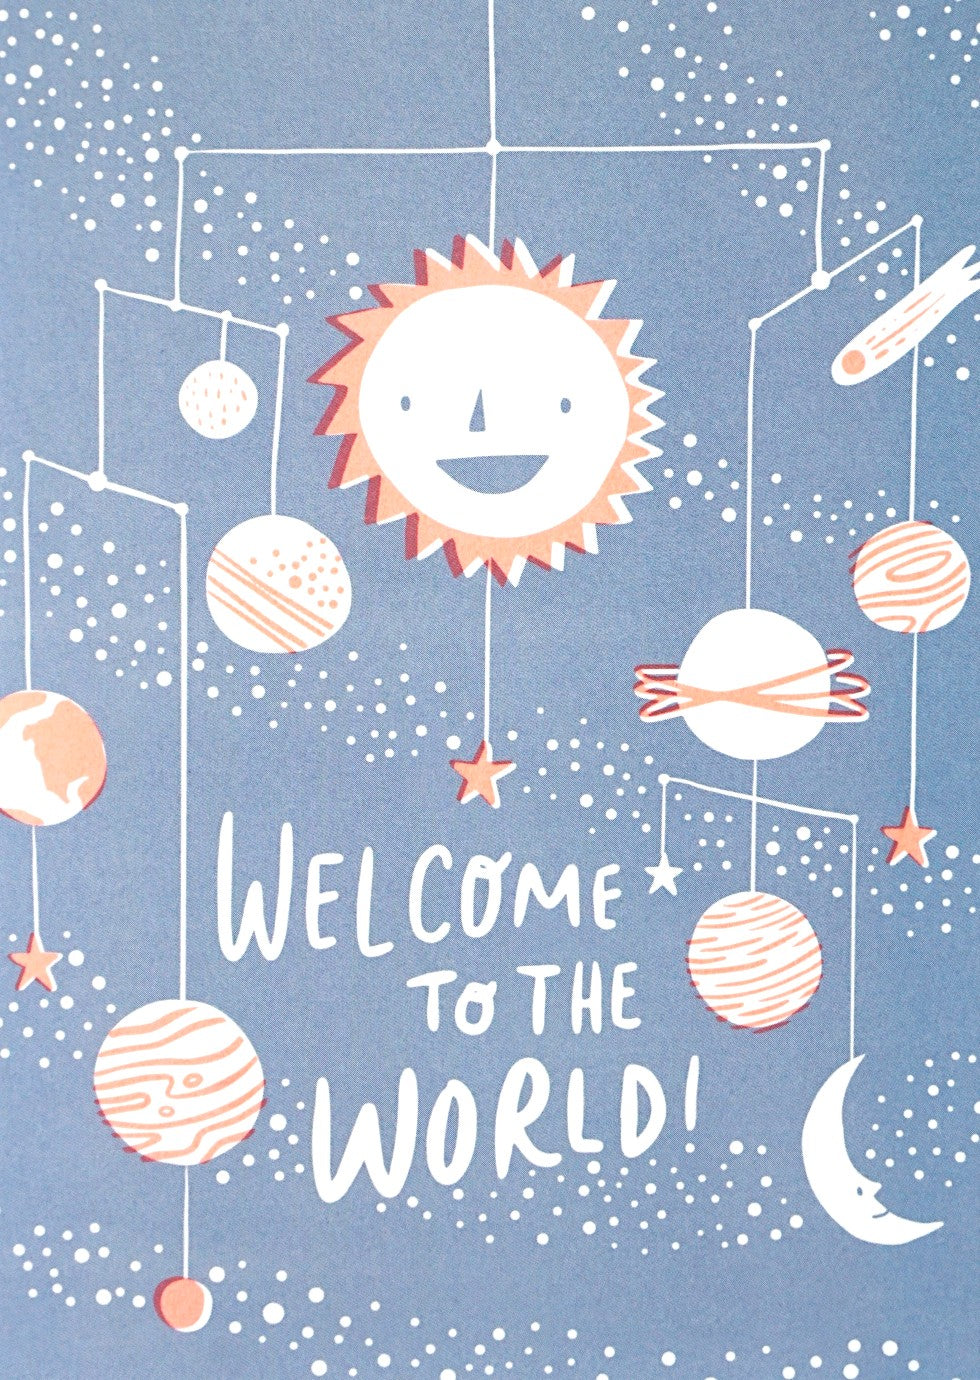 New Baby- Welcome to the World! Greetings Card